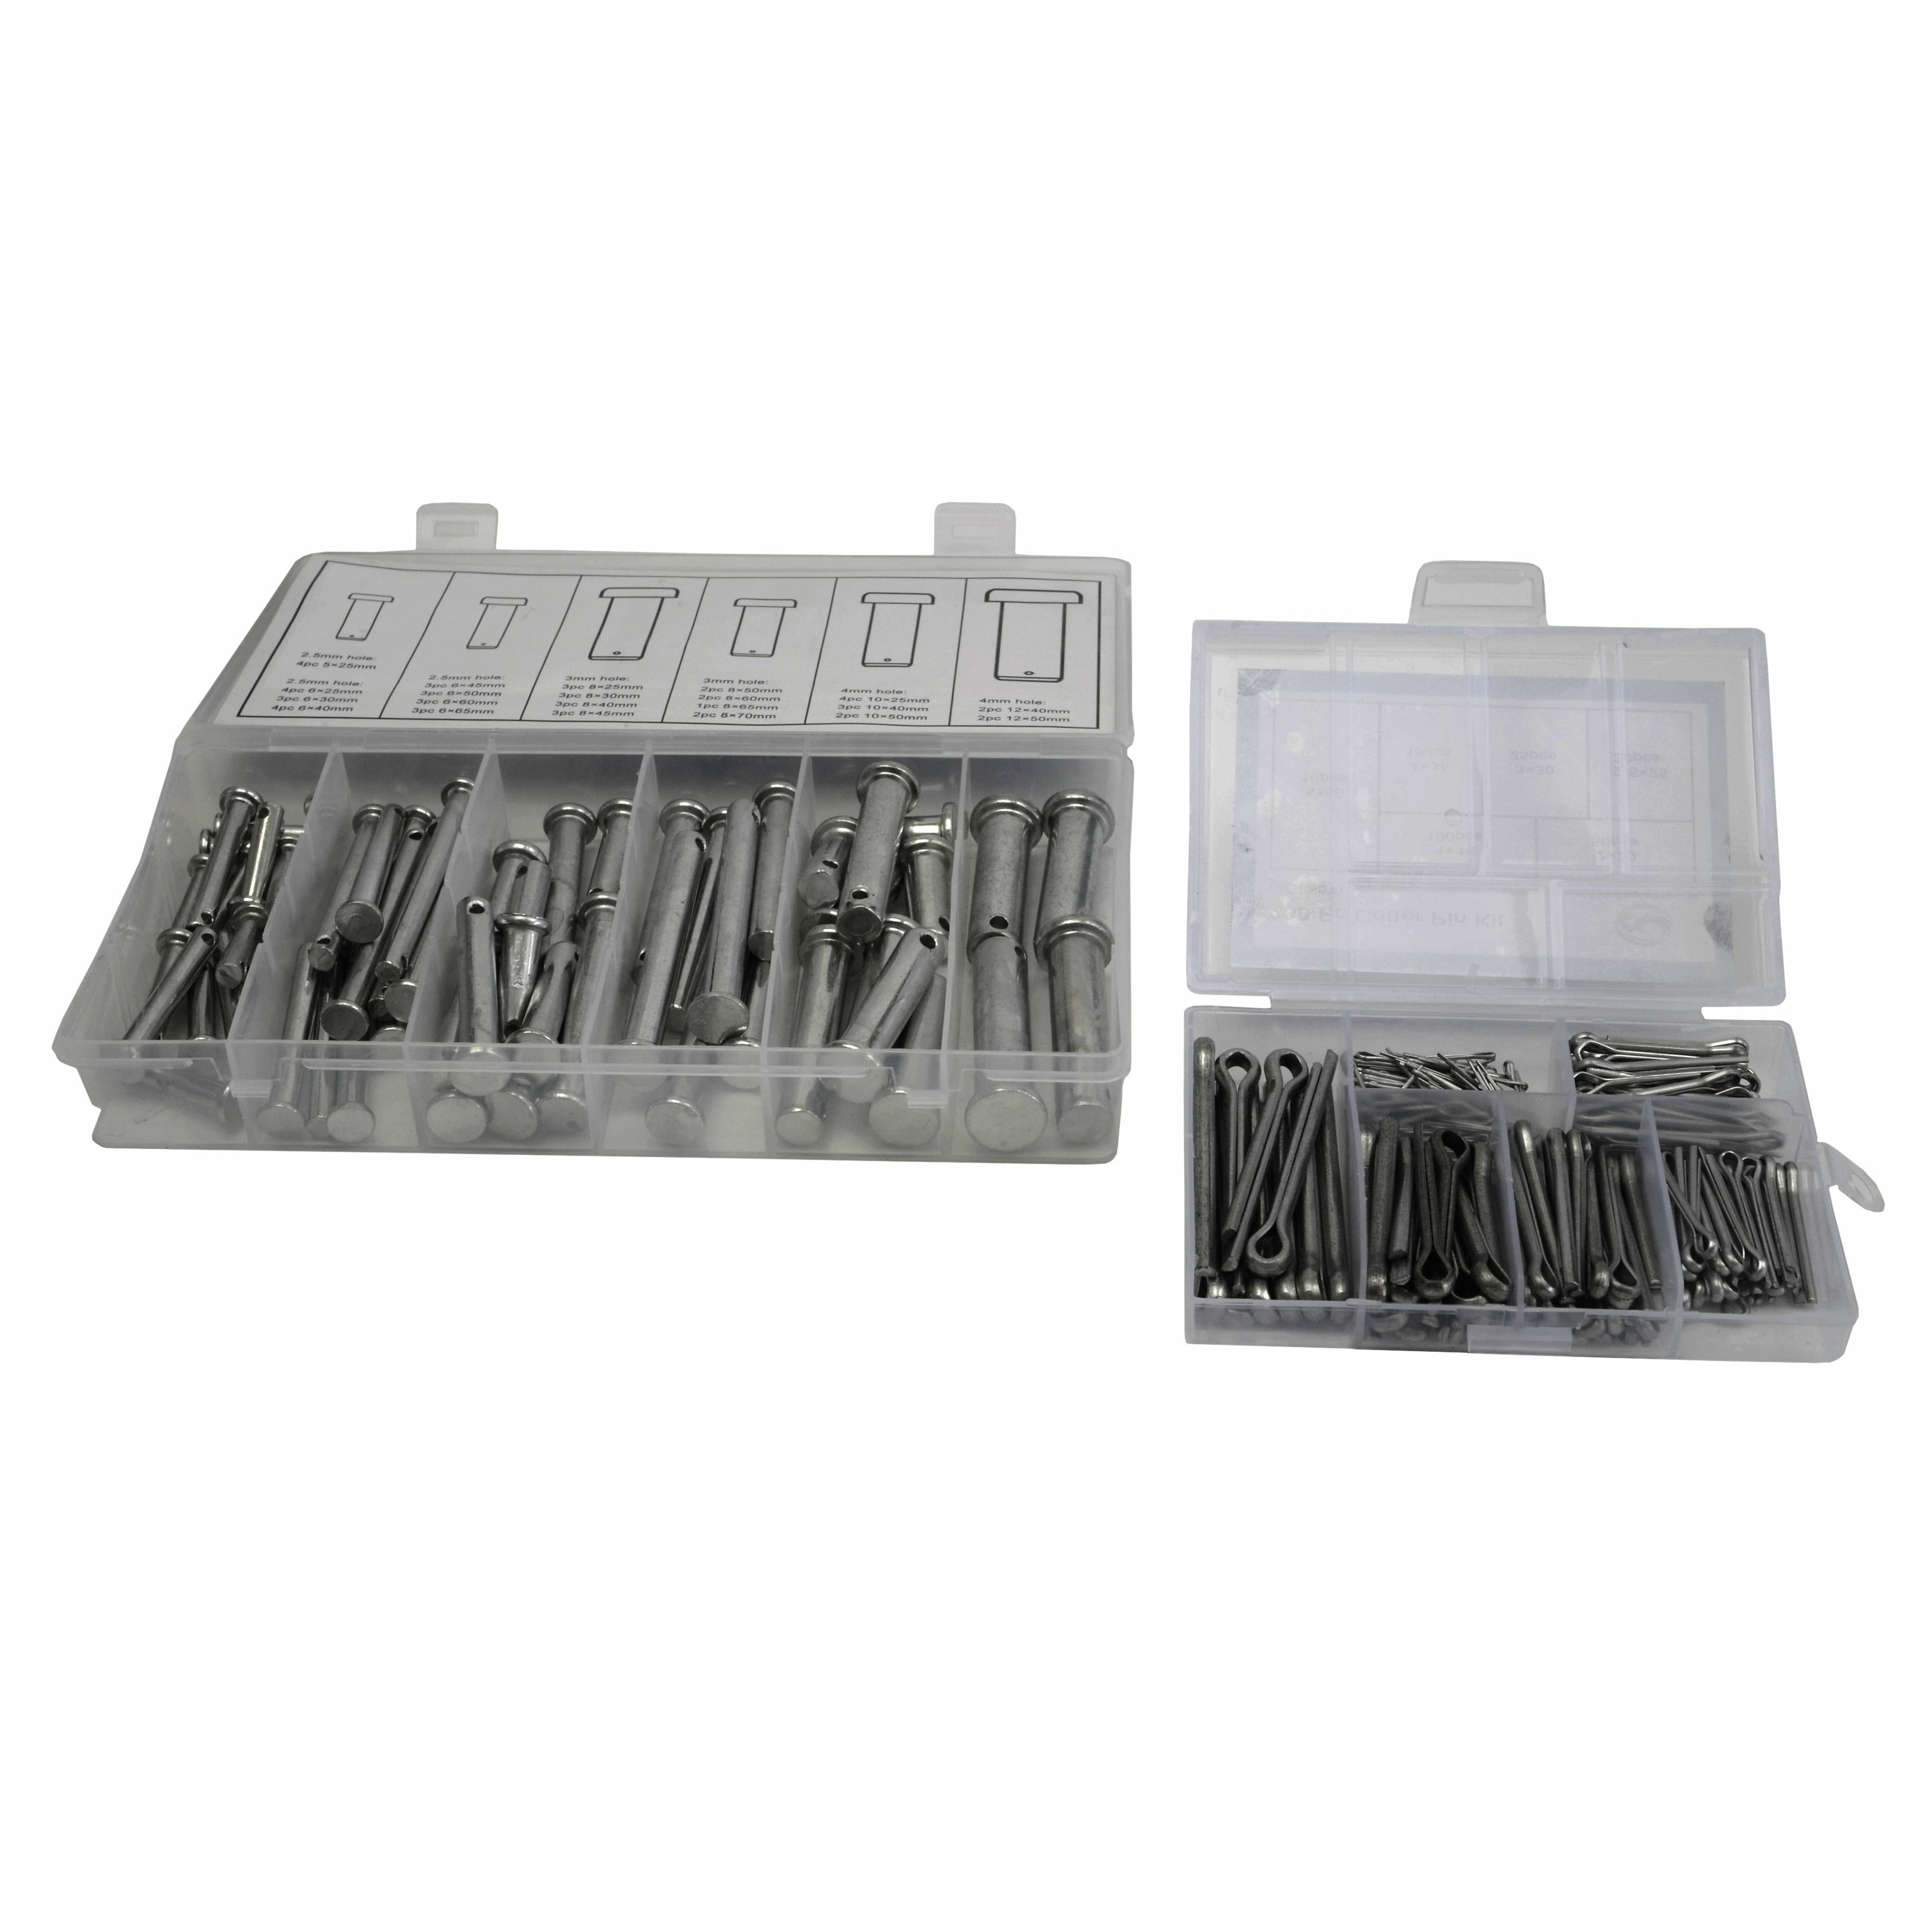 60pc Clevis Pin Kit and 230pc Cotter Pin Grab Kit